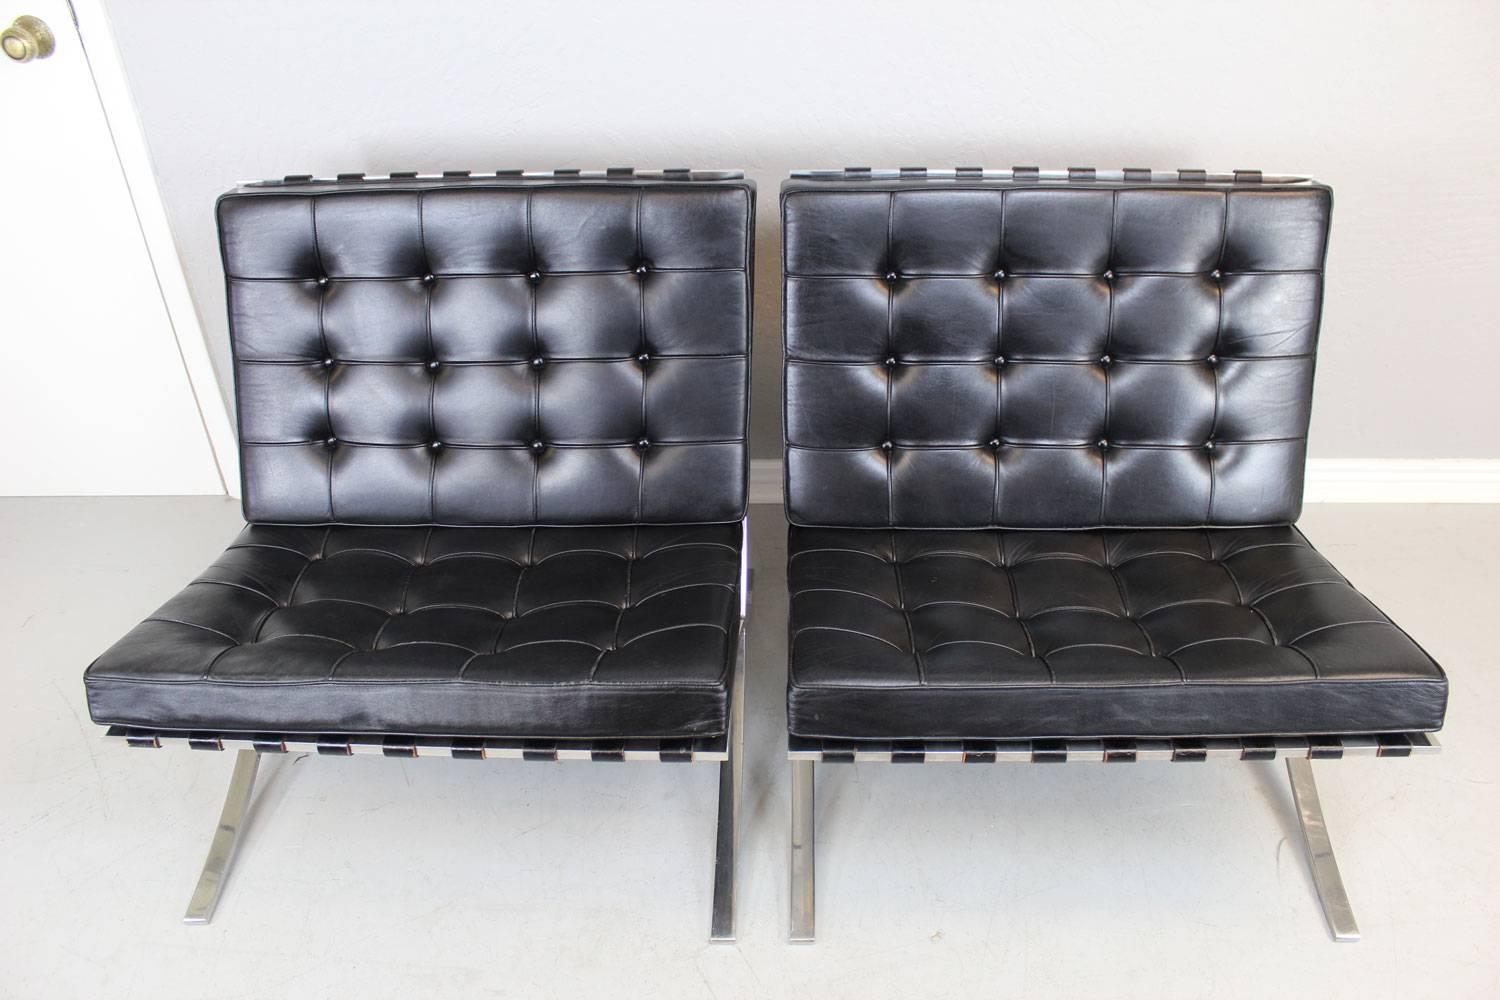 Mid-Century Modern Mies van der Rohe Barcelona Chairs (Pair) for Knoll